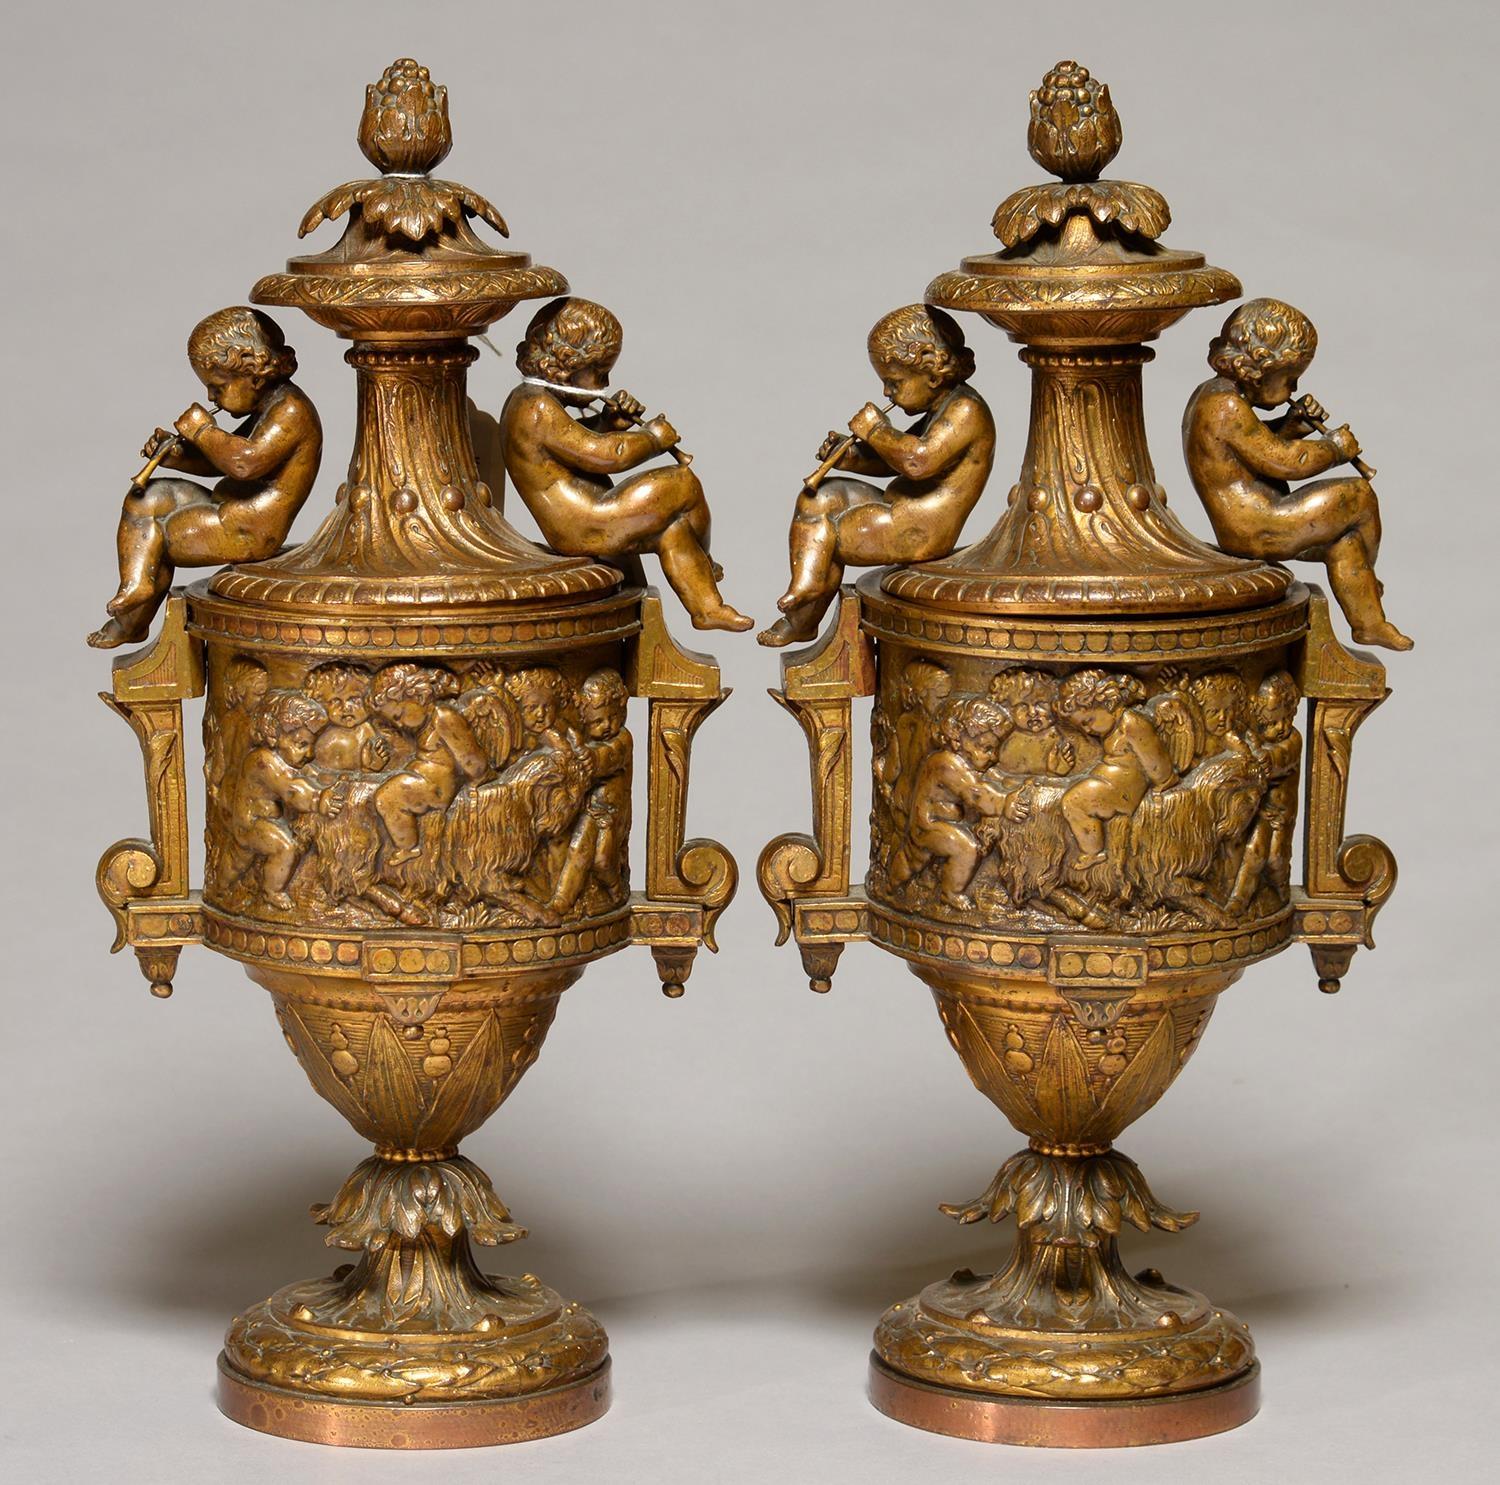 A PAIR OF FRENCH FIN DE SIECLE GILT LAQUERED AND BRONZED METAL URNS AND COVERS, C1900, THE DOMED